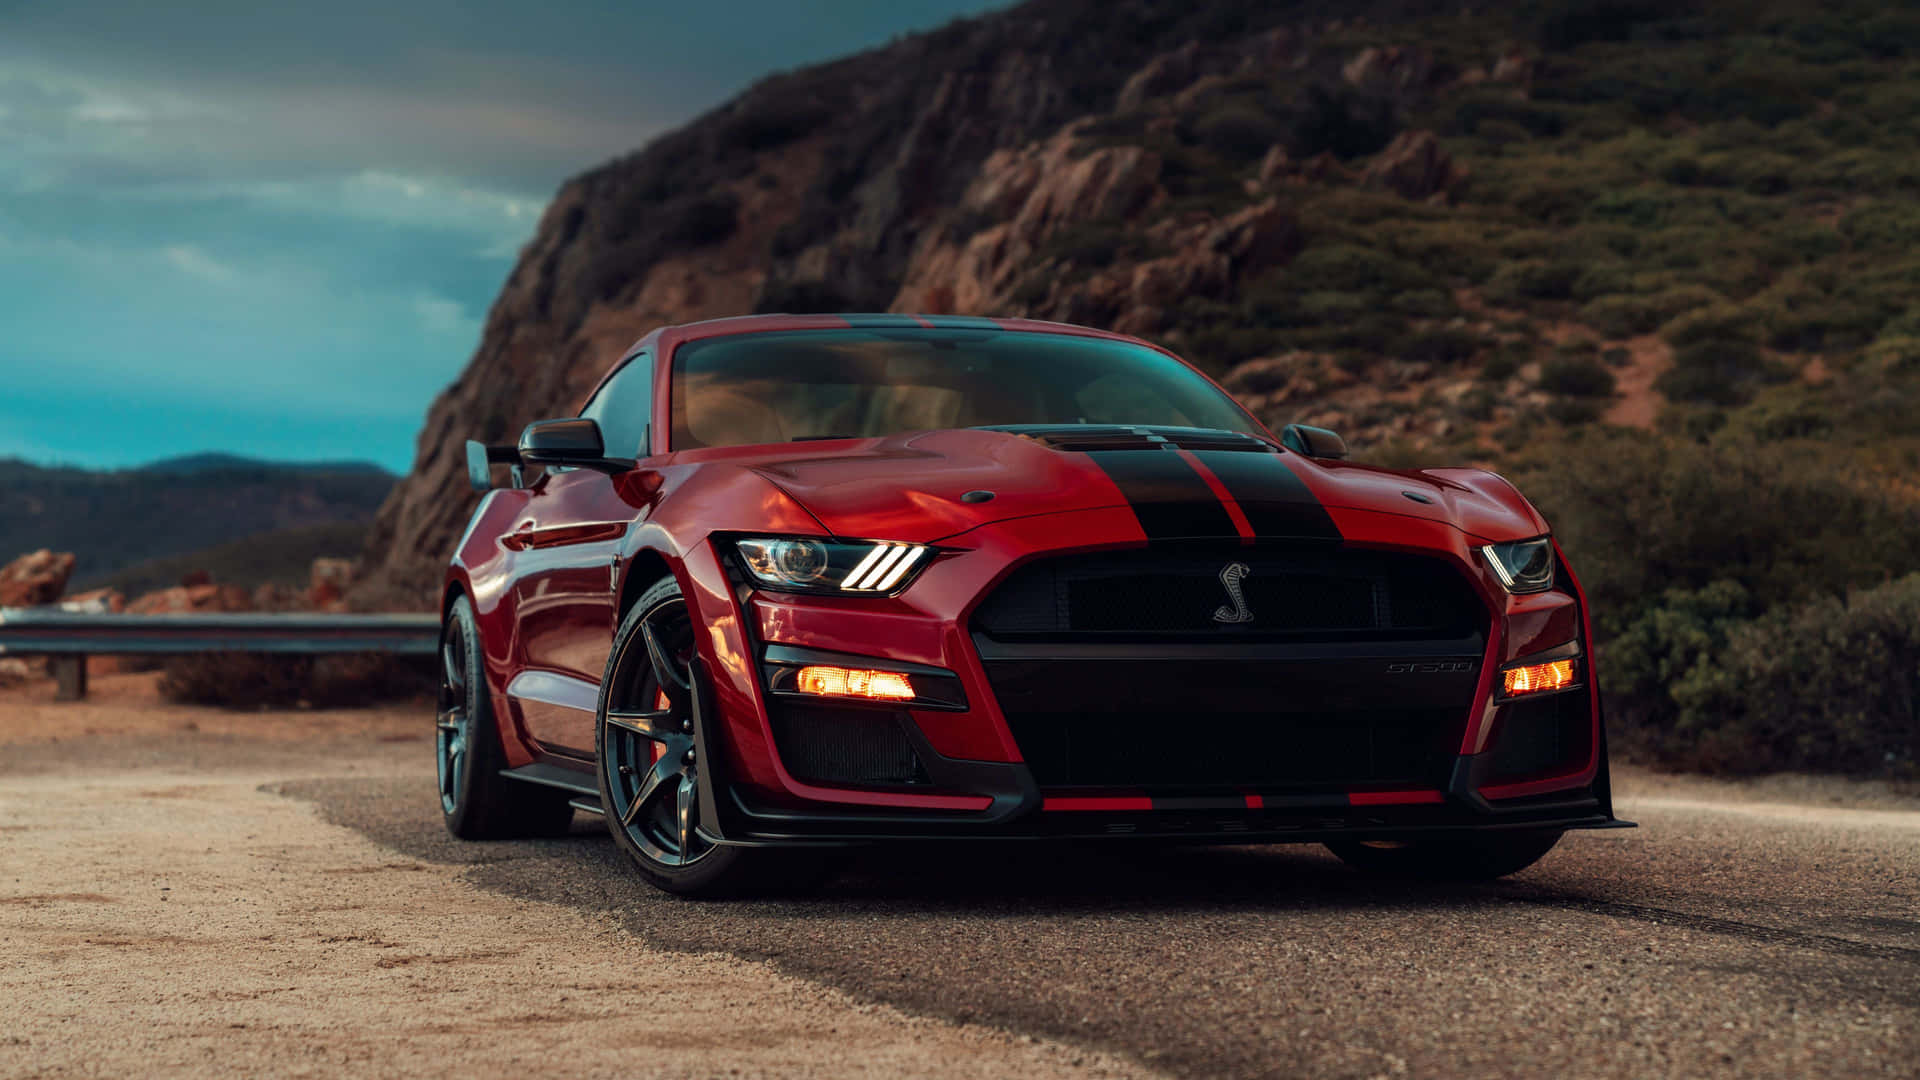 Ford Mustang 2020 Shelby Gt500 Wallpaper